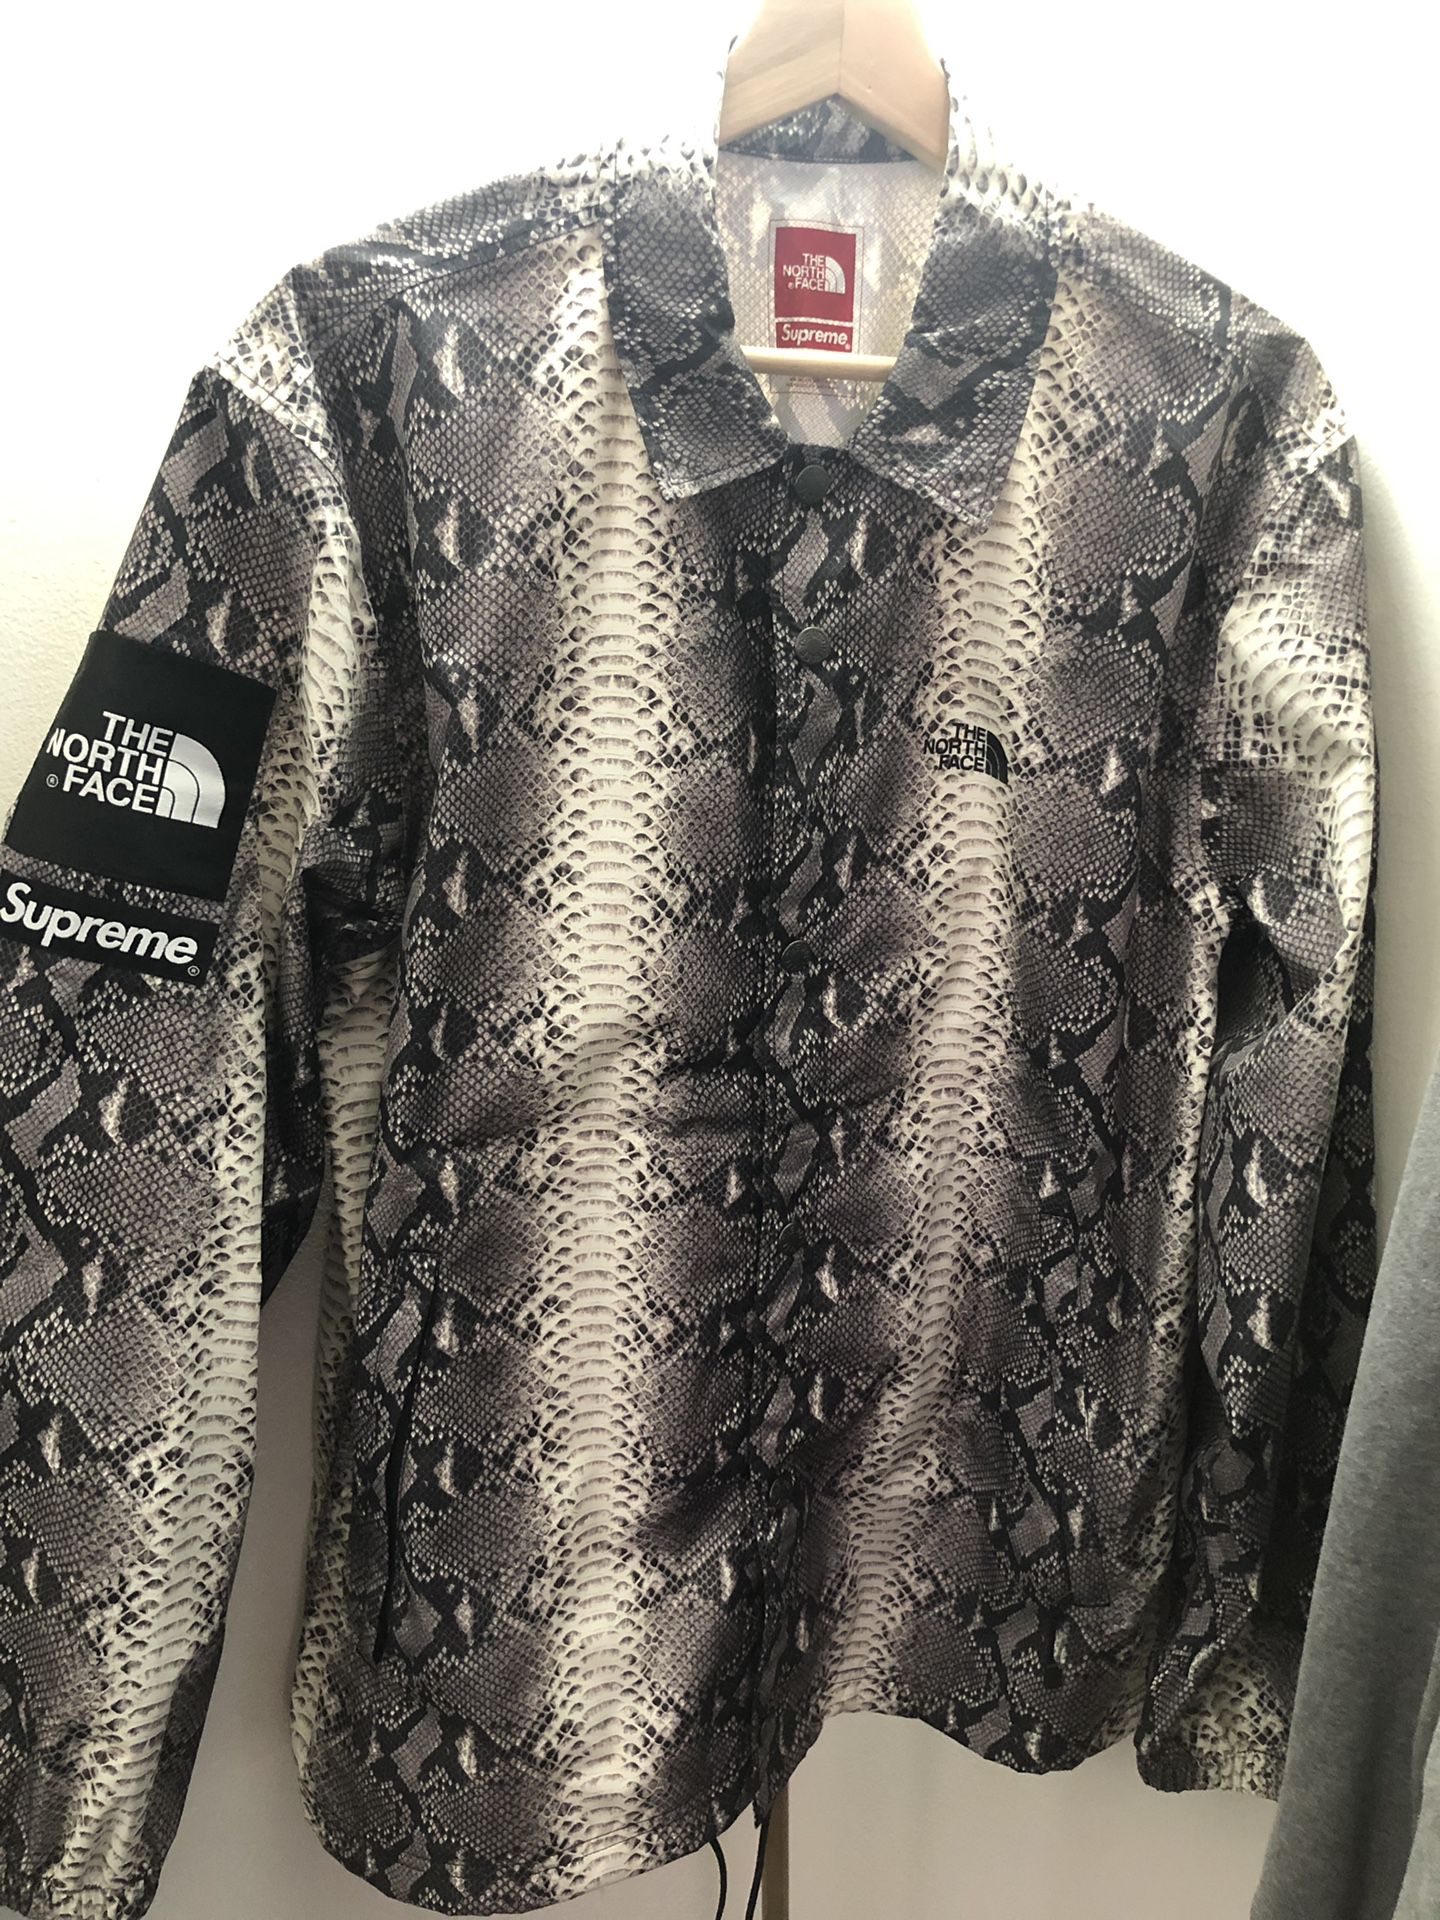 Supreme x The North Face Snakeskin Coach Jacket